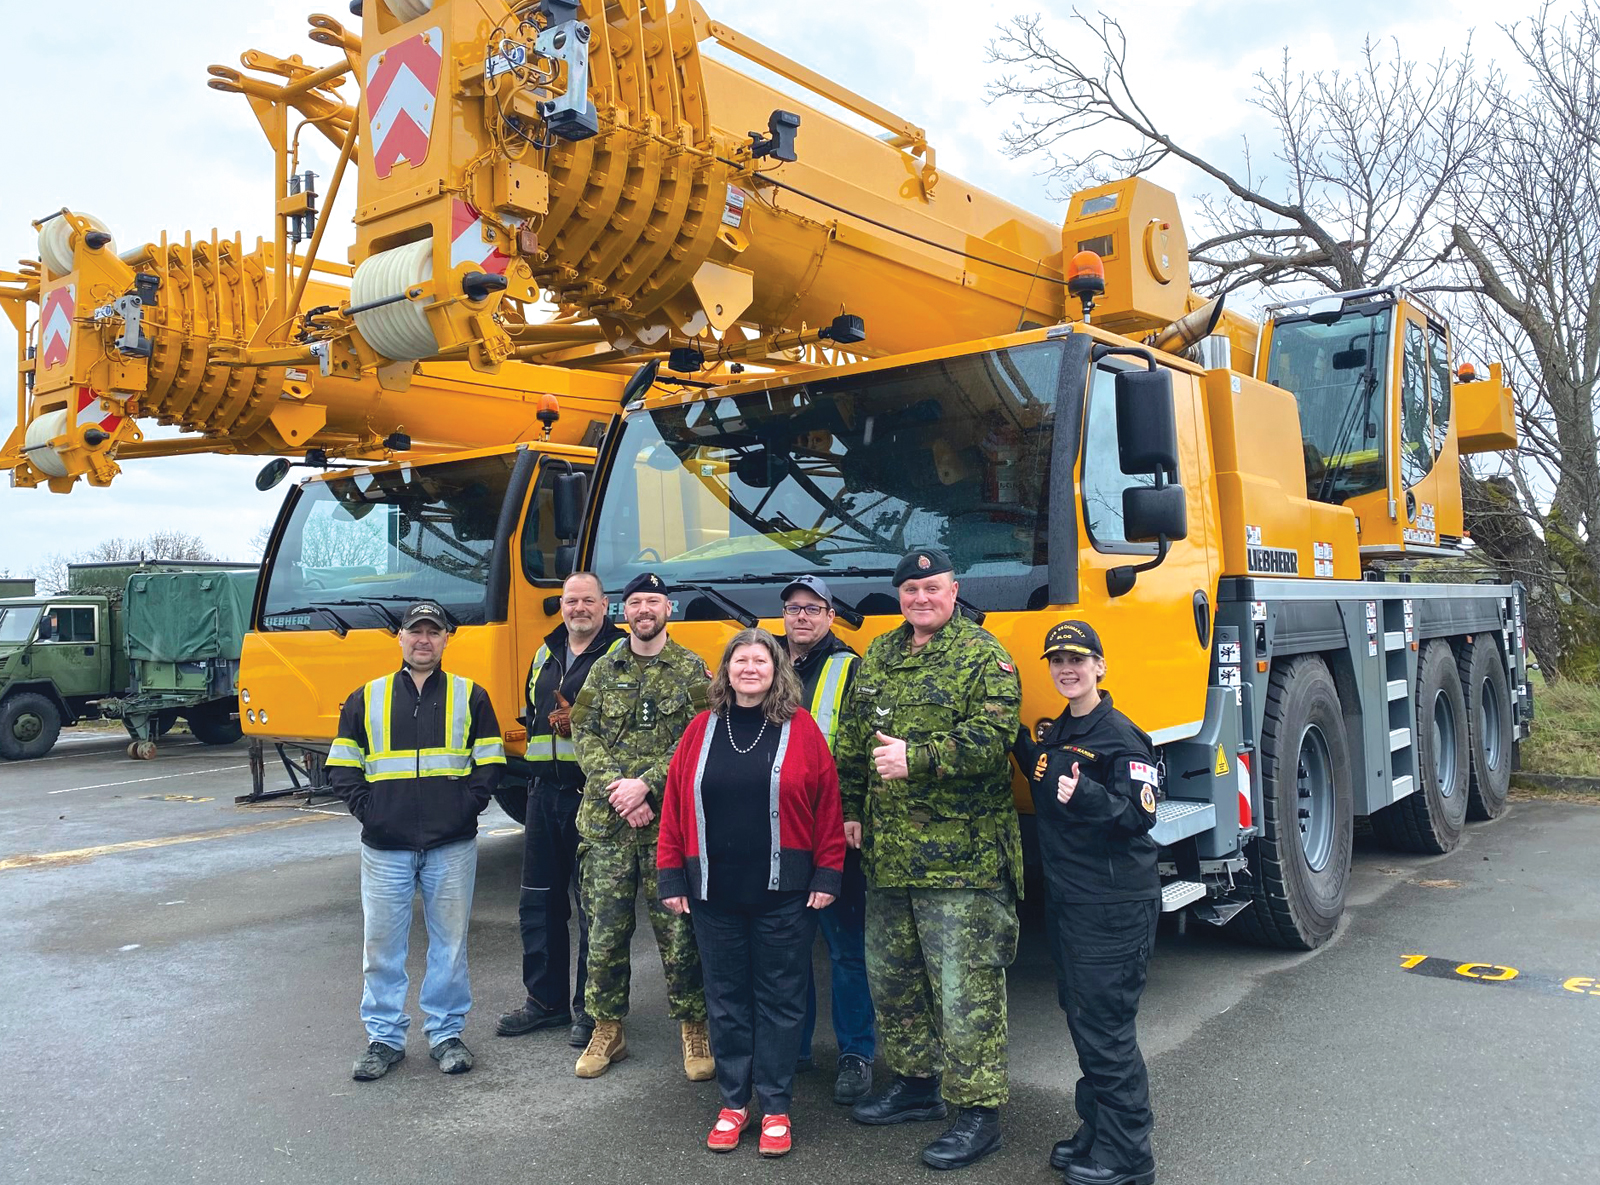 Members of Base Logistics and Transport Electrical and Mechanical Engineering celebrated the arrival of two new 60-tonne cranes to CFB Esquimalt in March 2020.